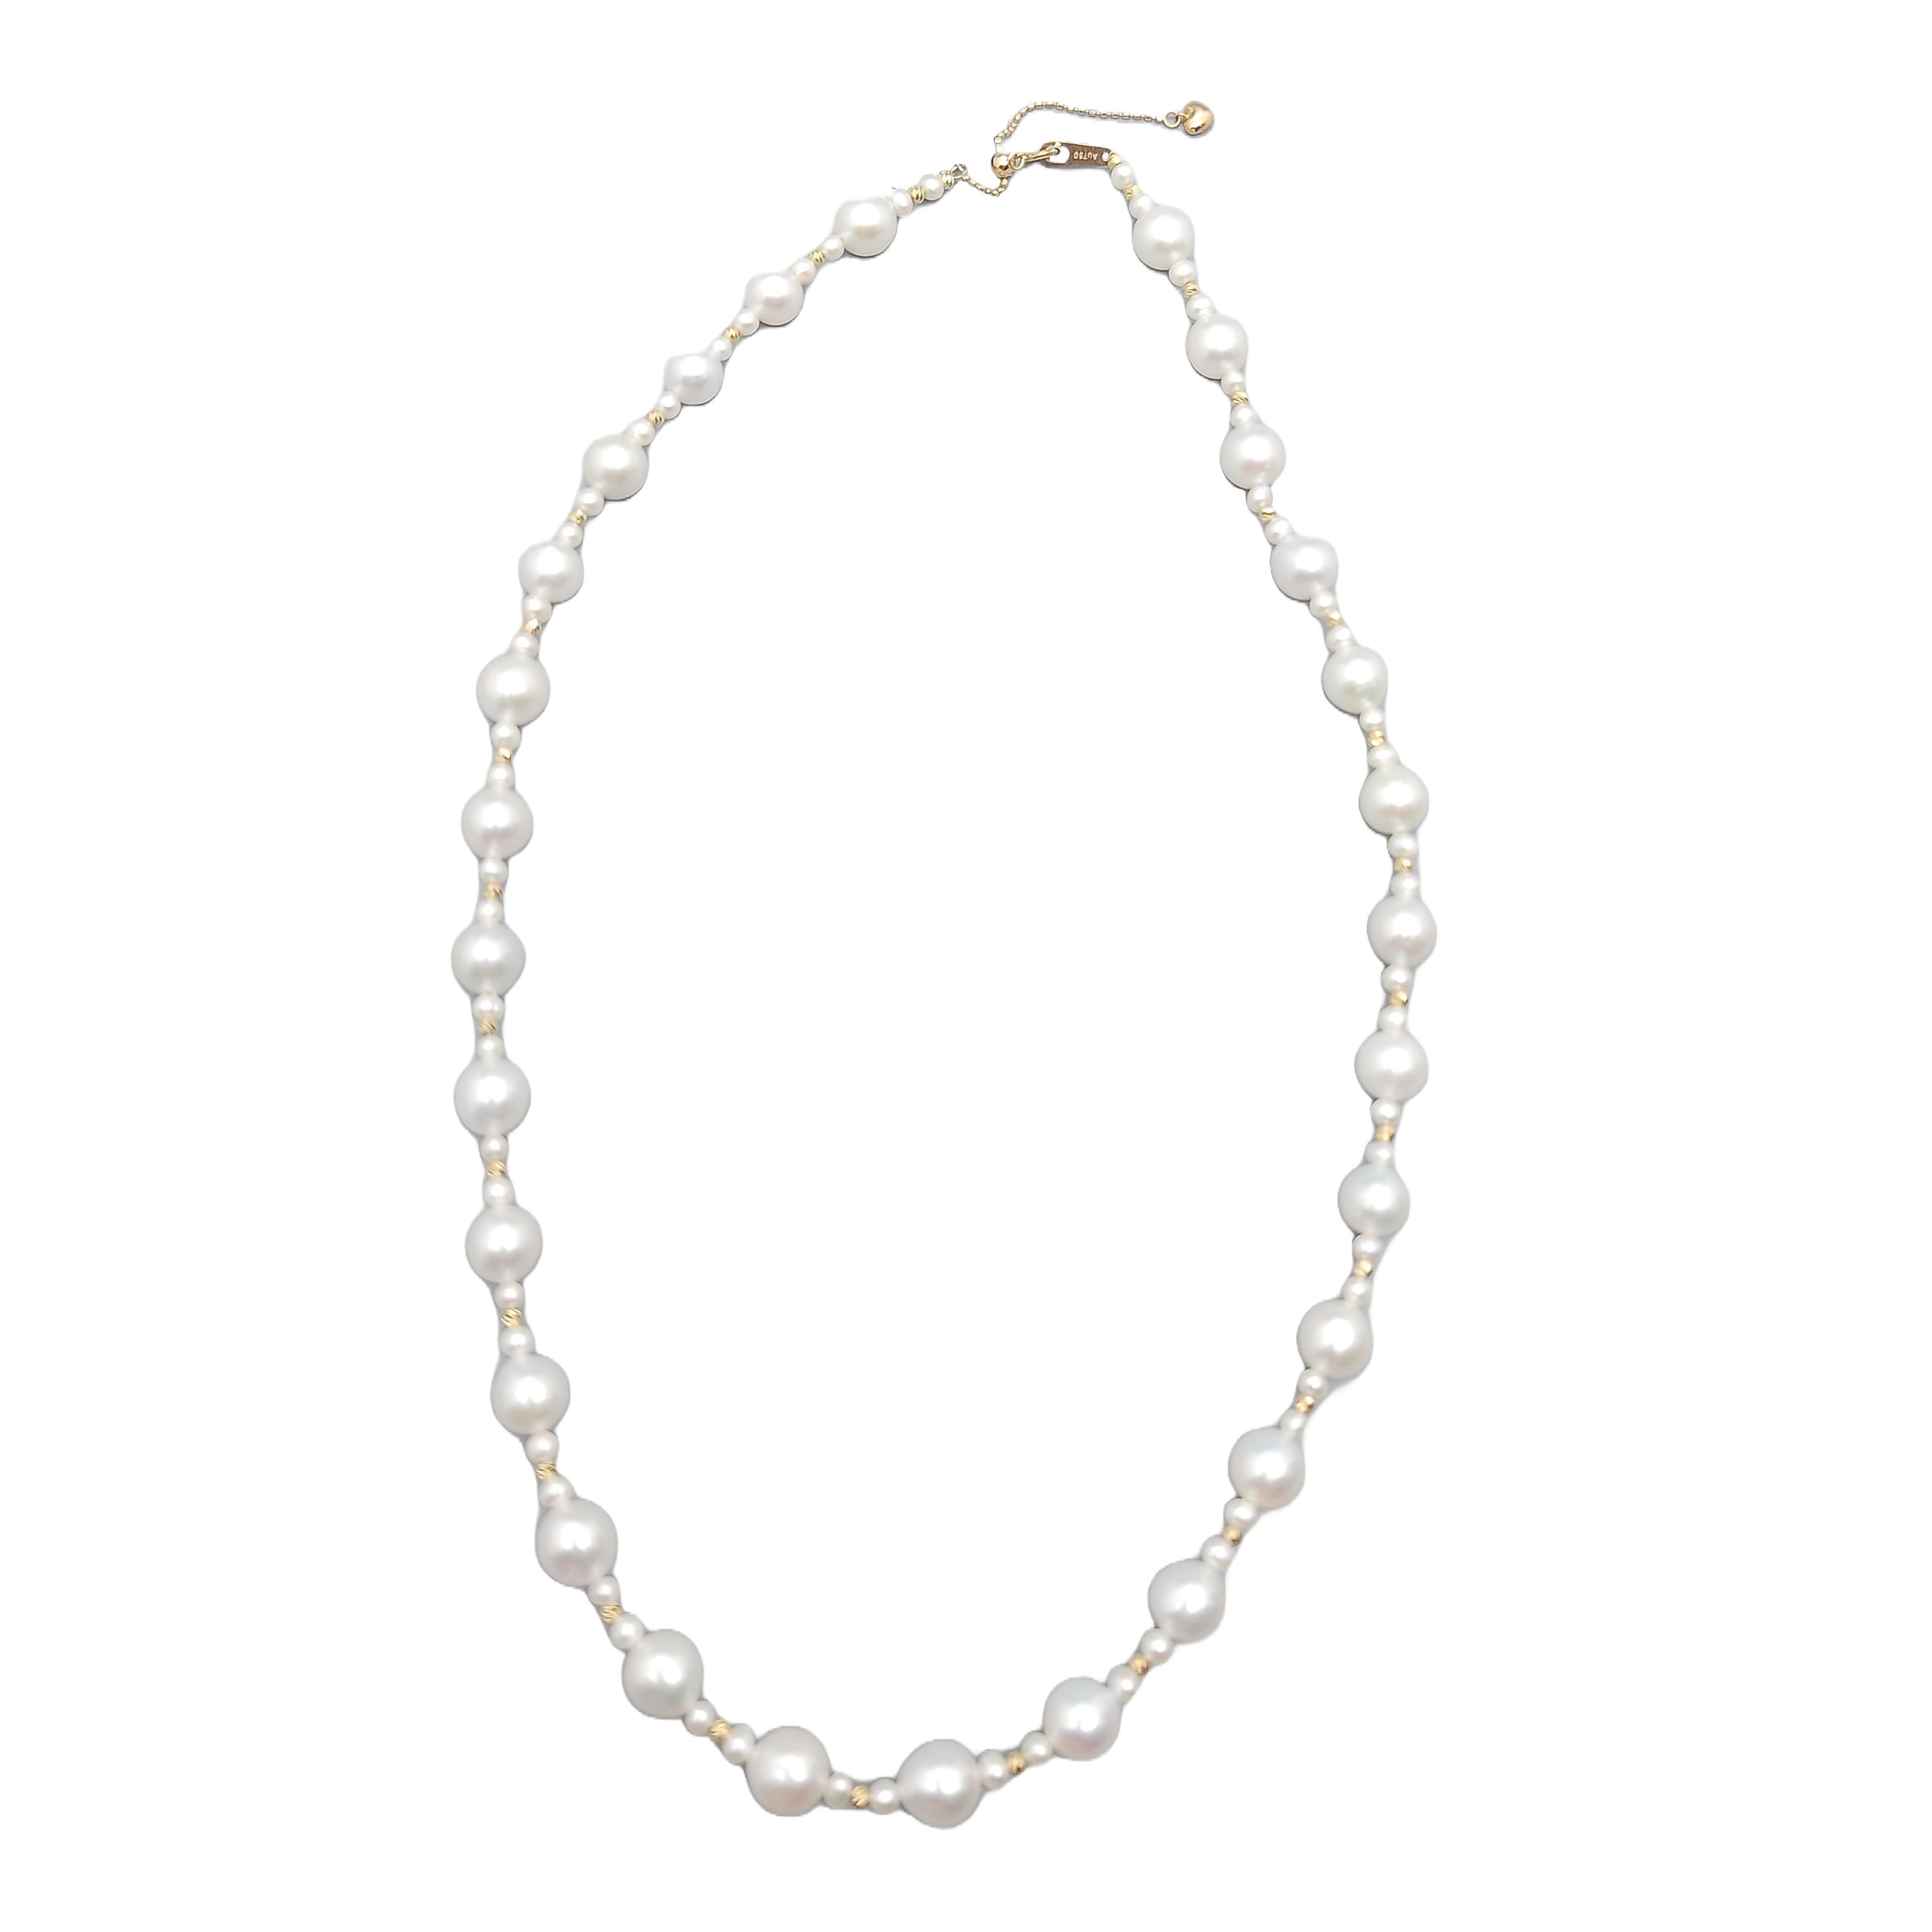 2.5 + 7 Classic Pearls Necklace